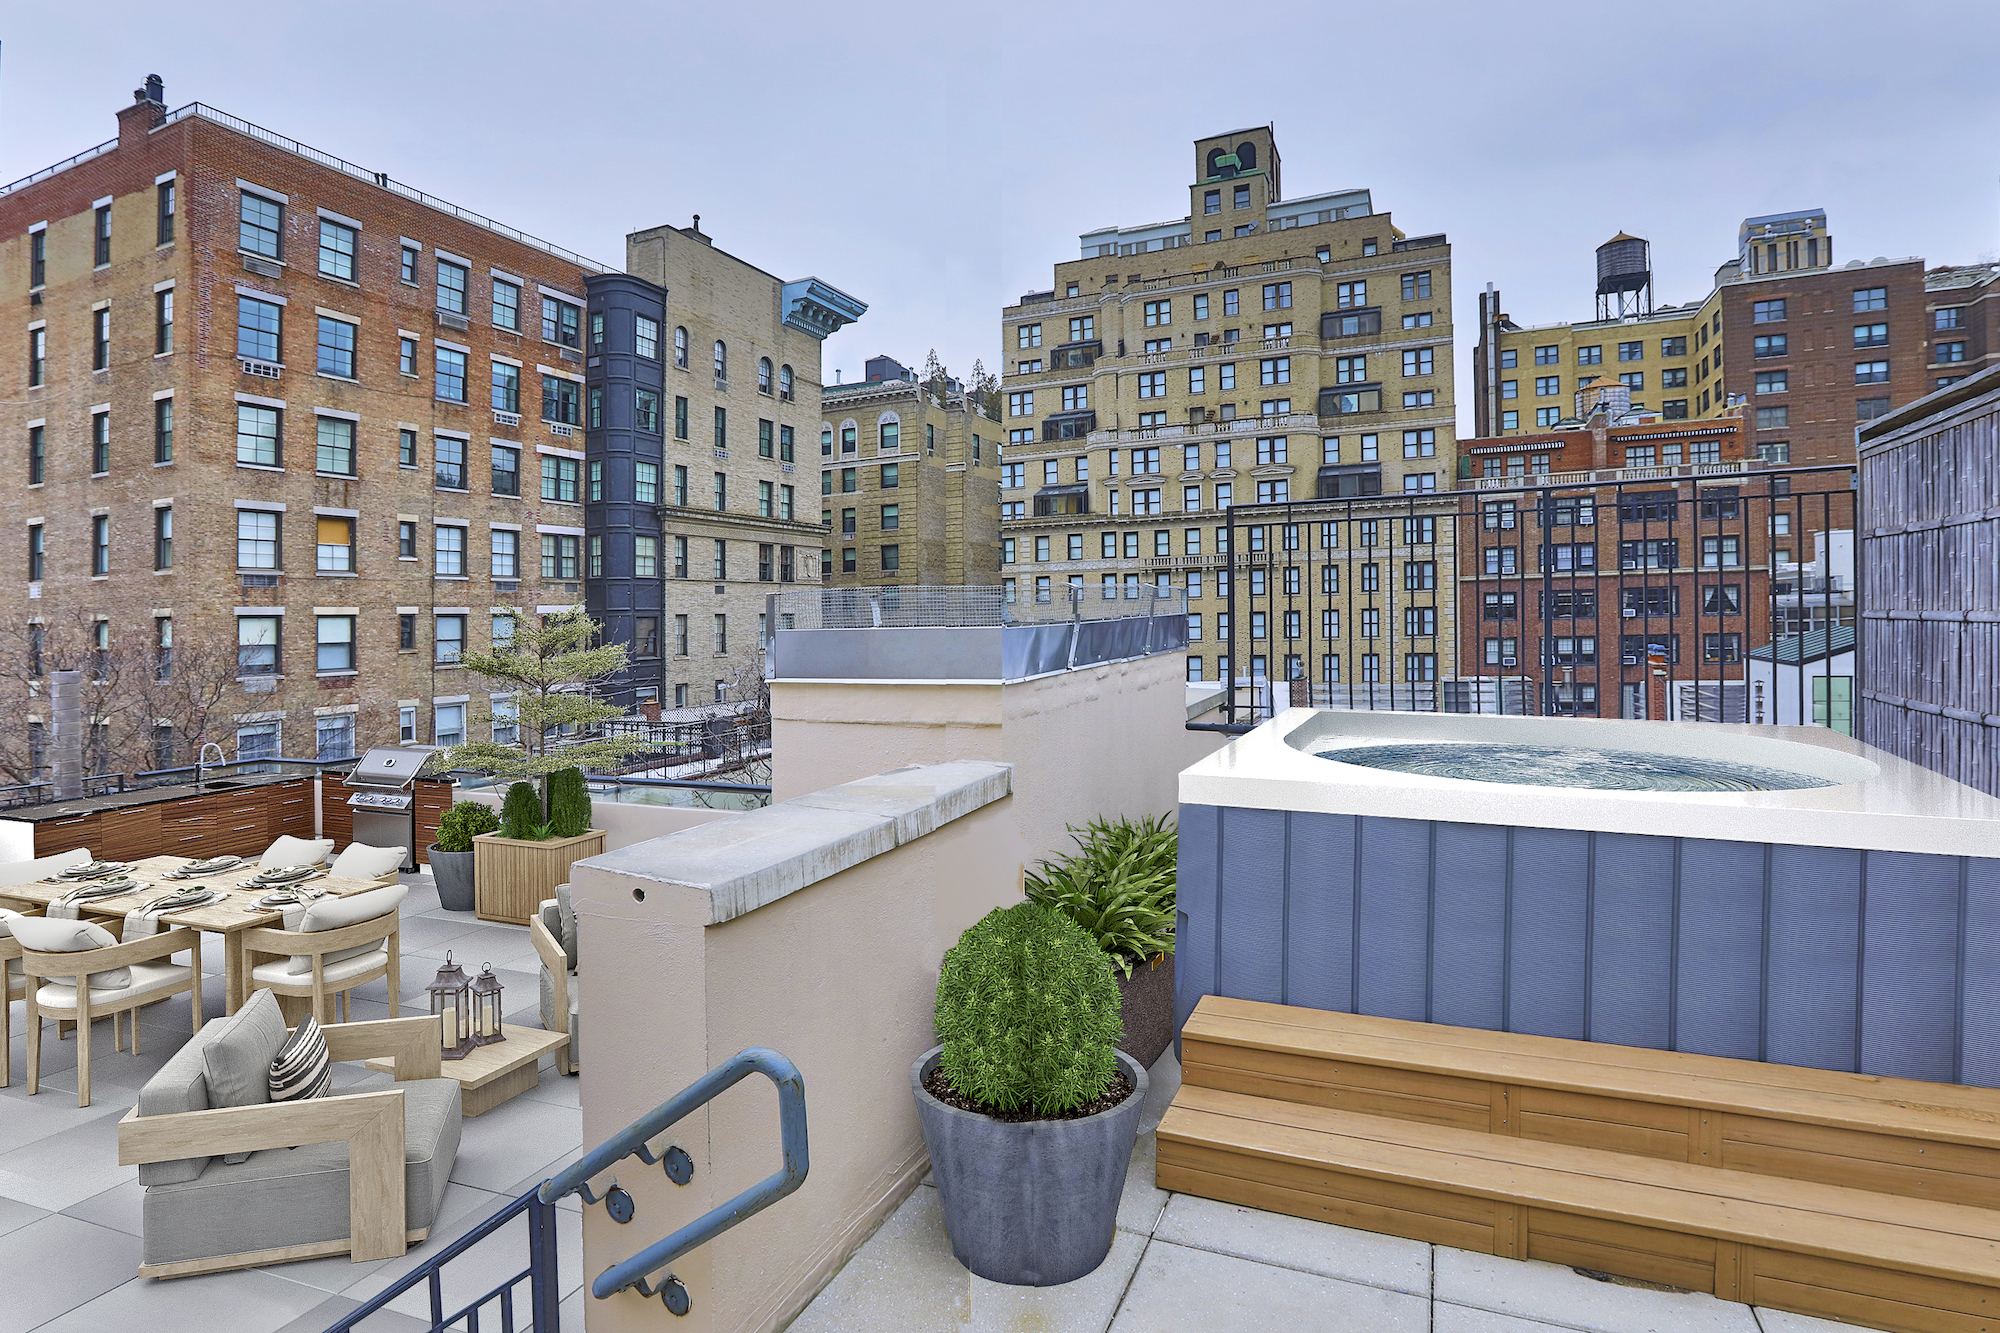 For $45K/month, rent this Upper East Side penthouse with a rooftop hot tub and three living rooms